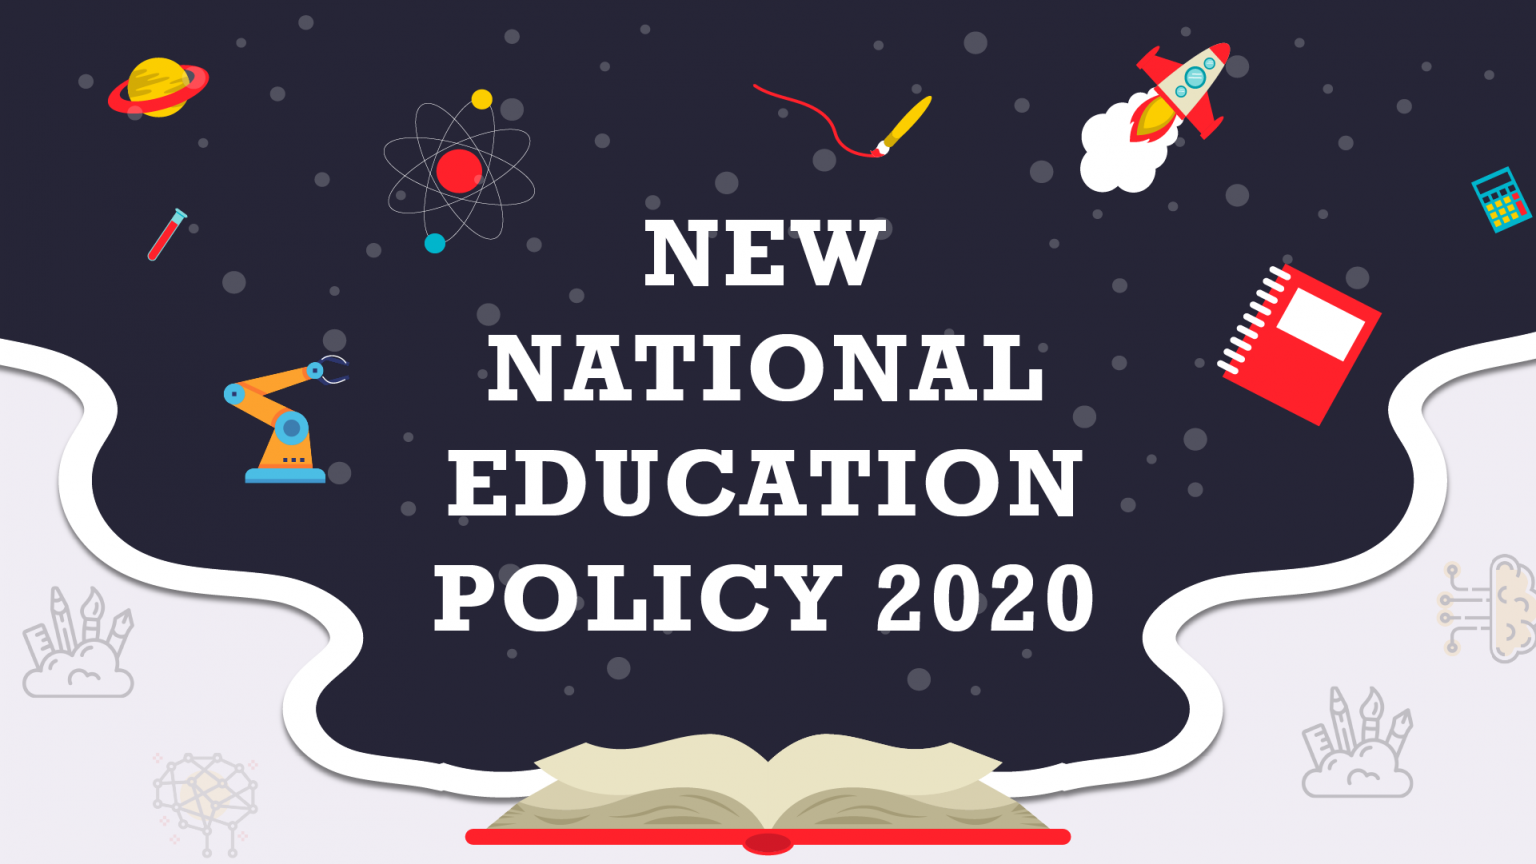 assignment on new education policy 2020